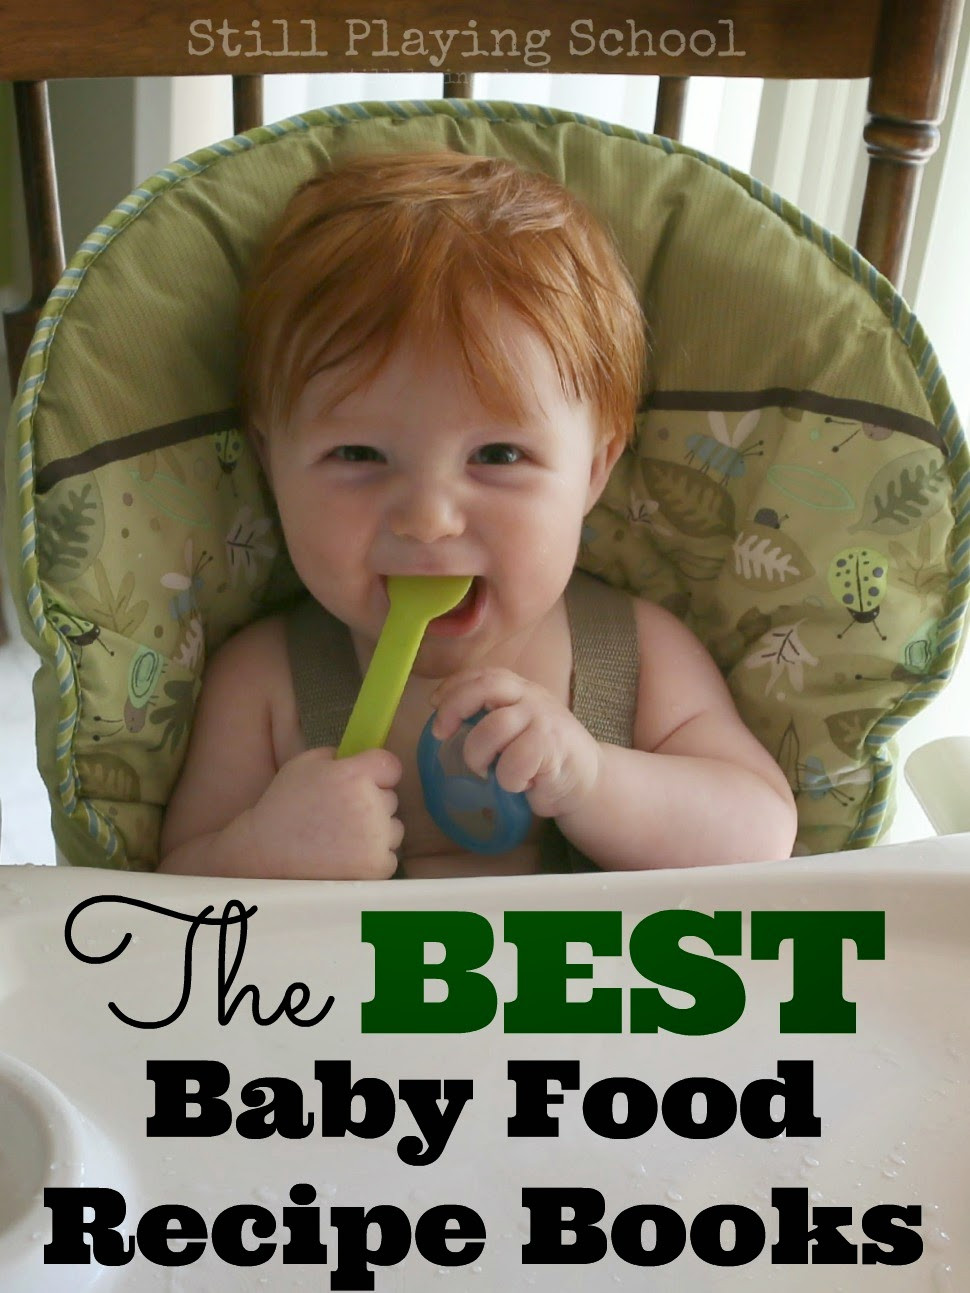 Best Baby Food Recipe Book
 The Best Baby Food Recipe Books